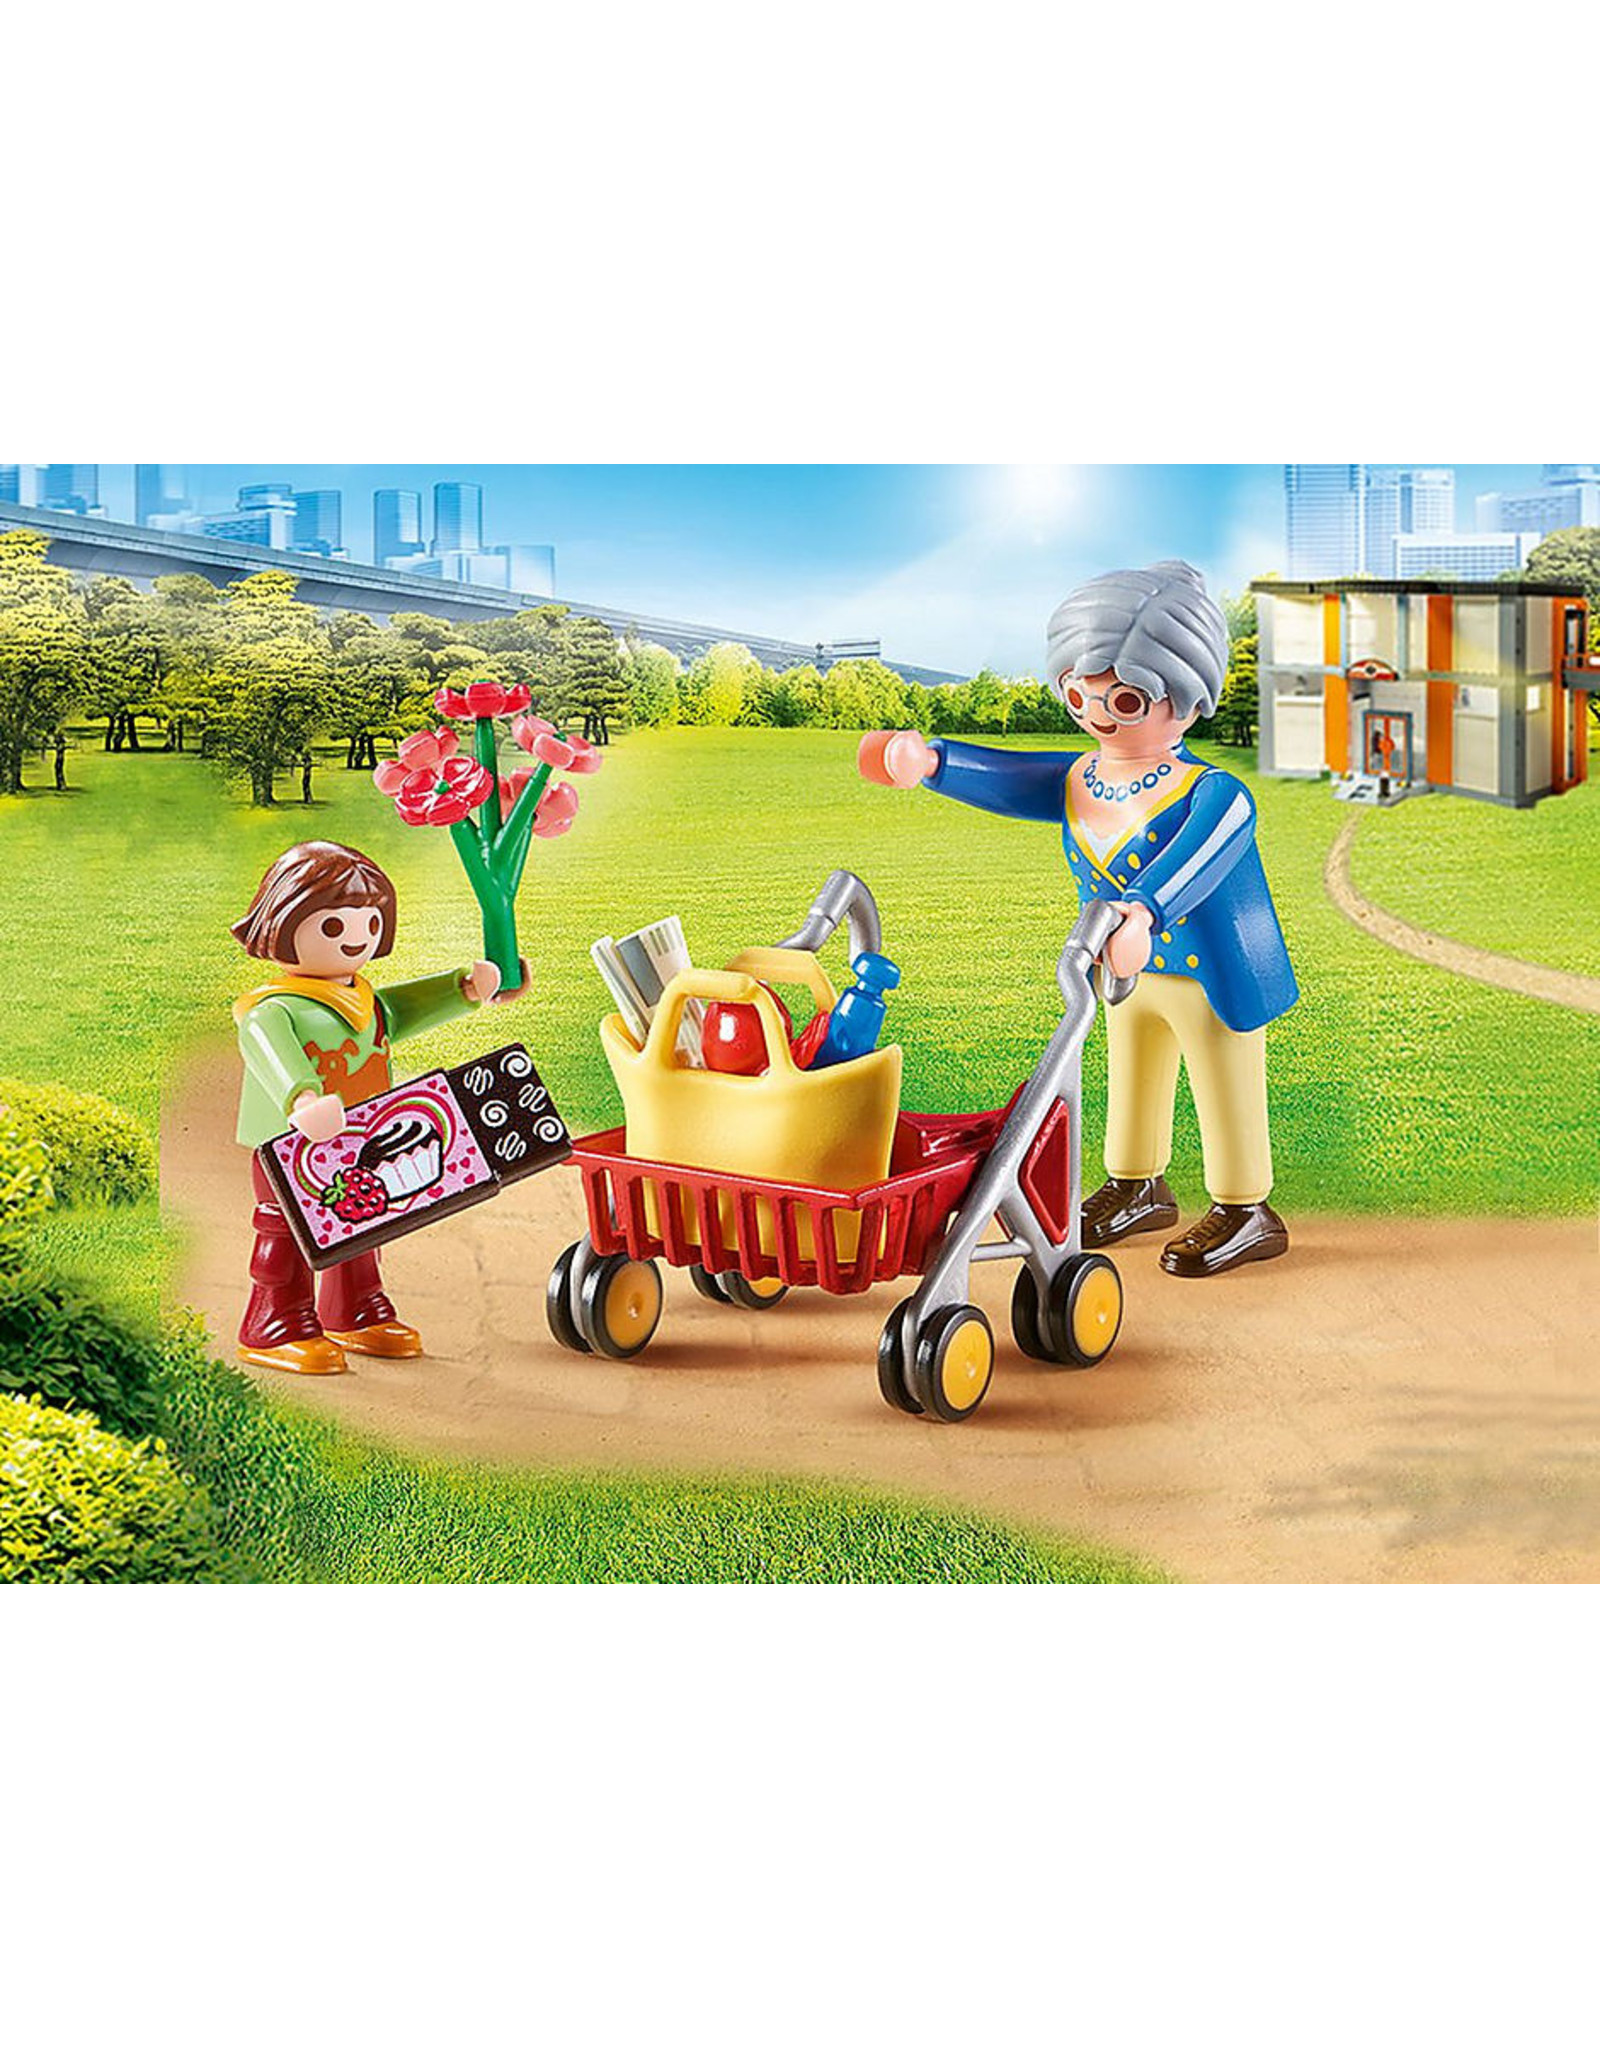 Playmobil Grandmother with Child